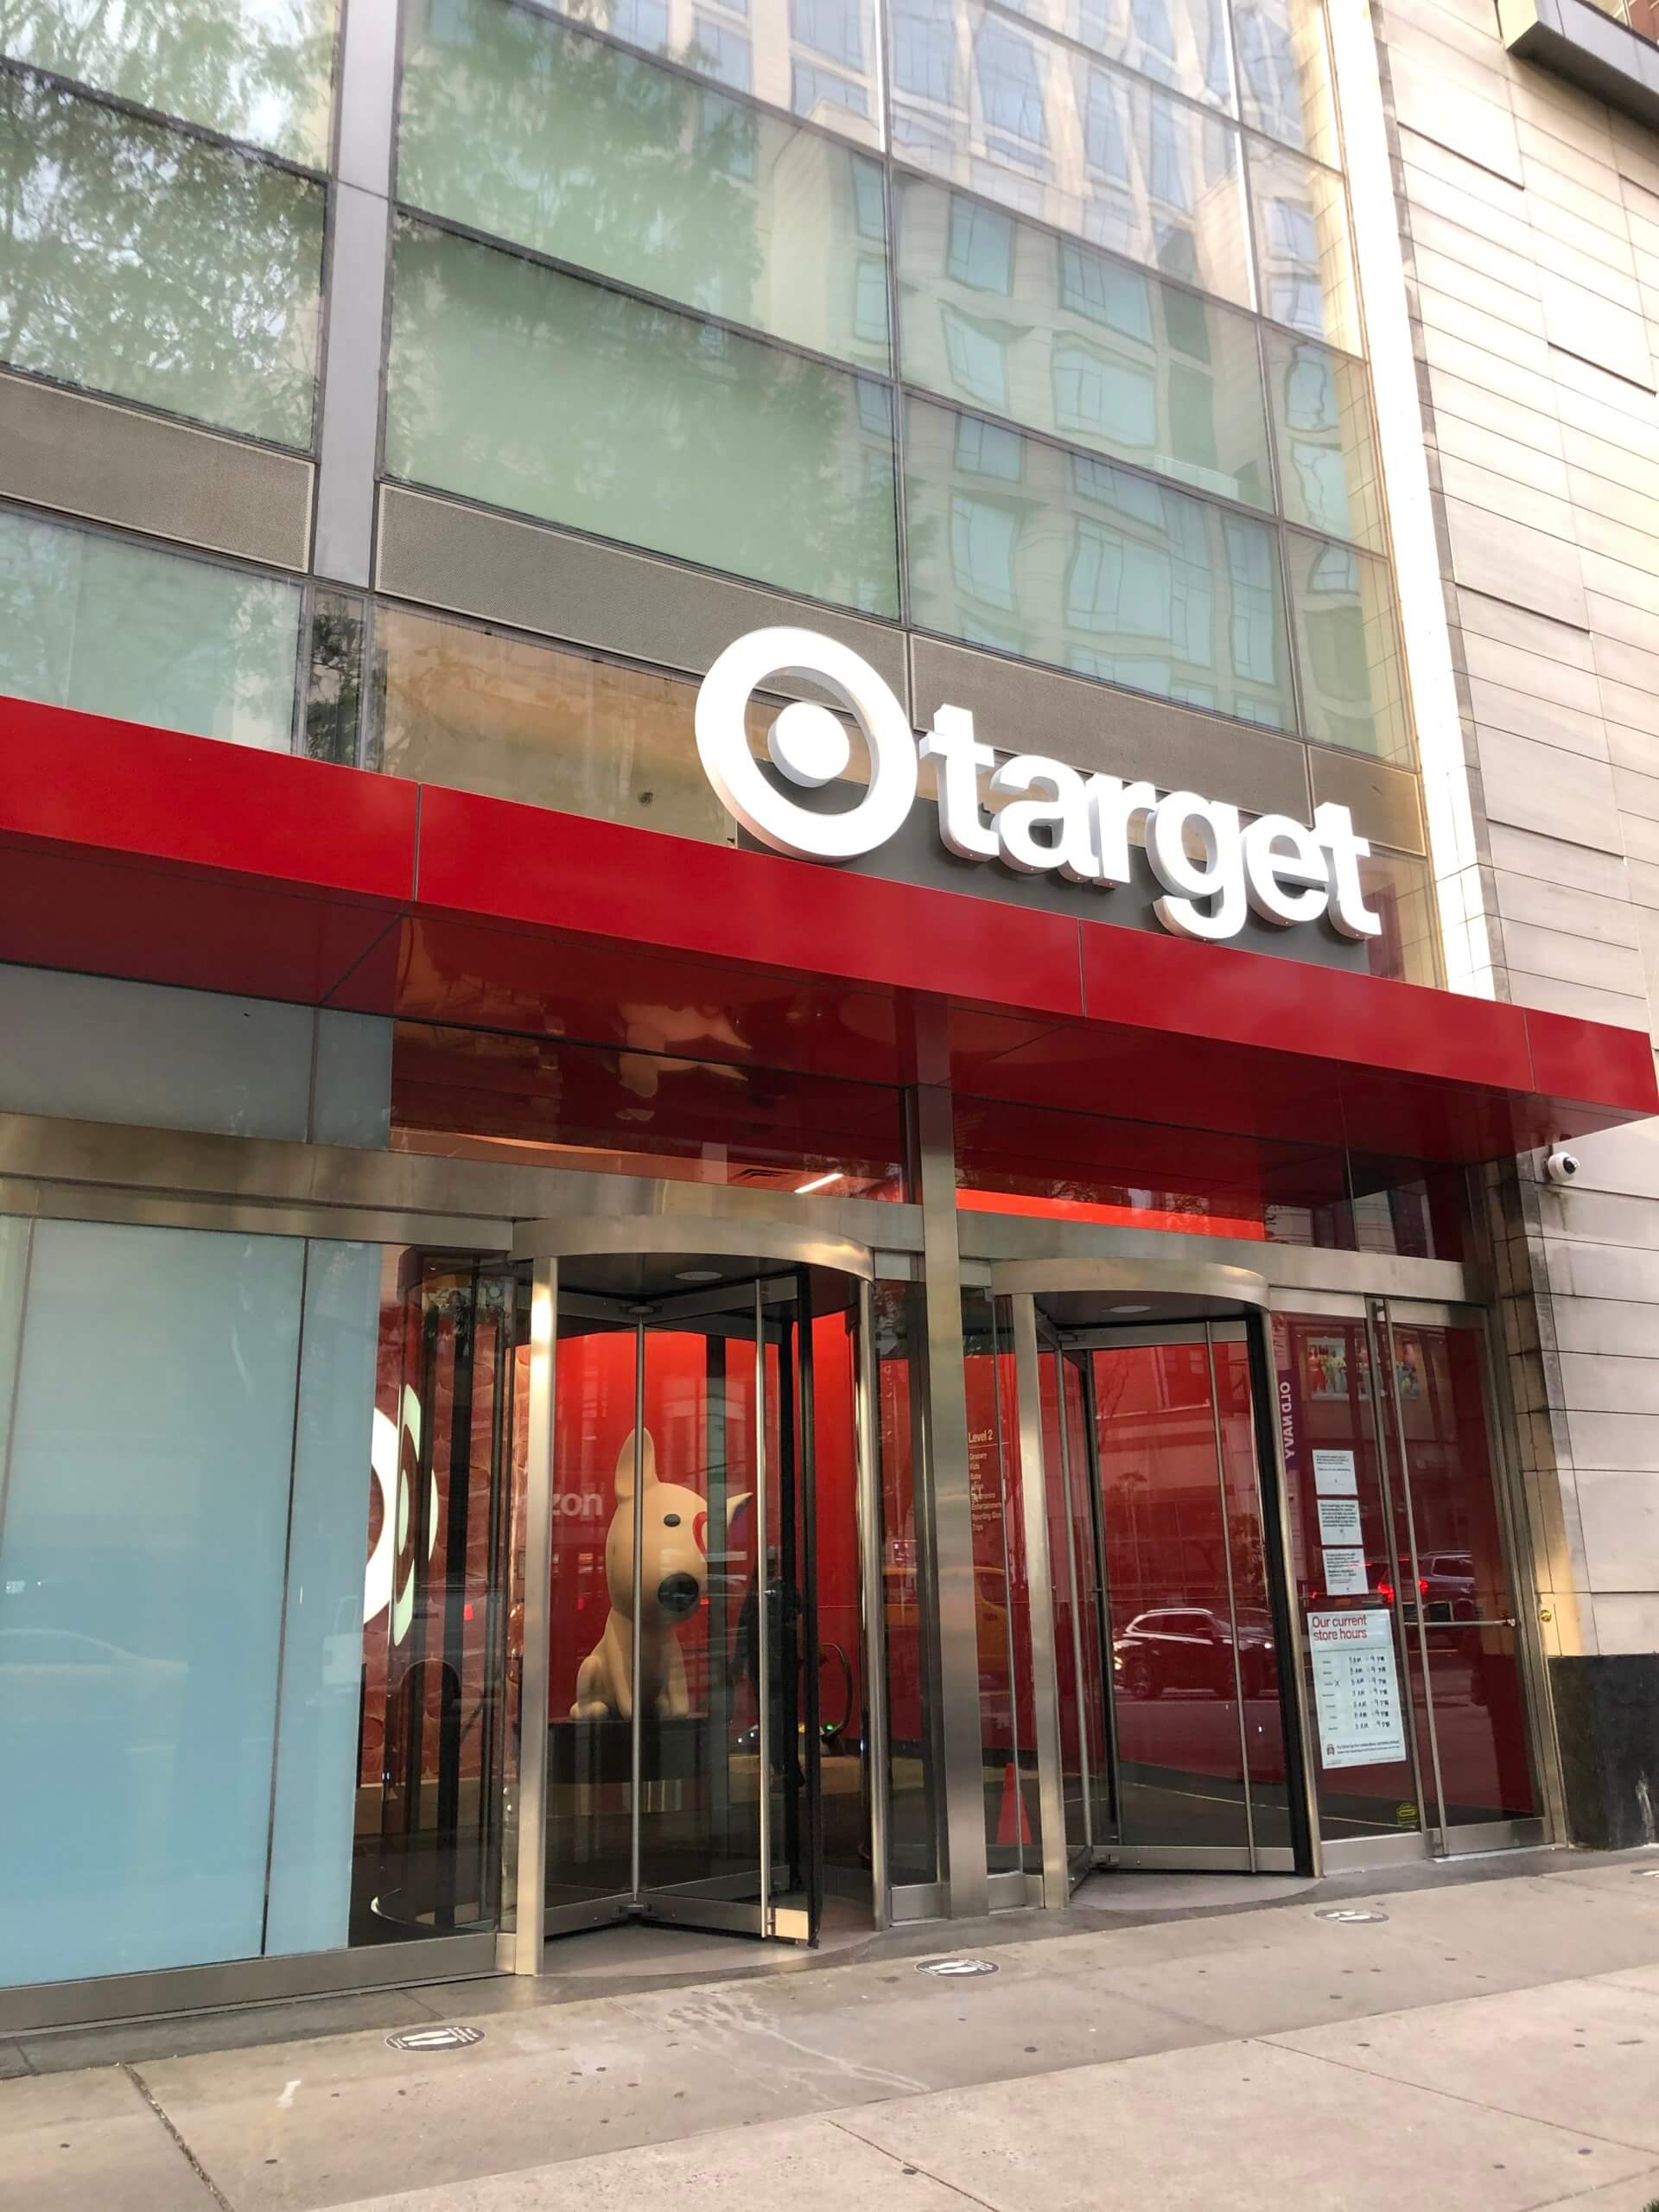 New Target location opens for business on the Upper East Side